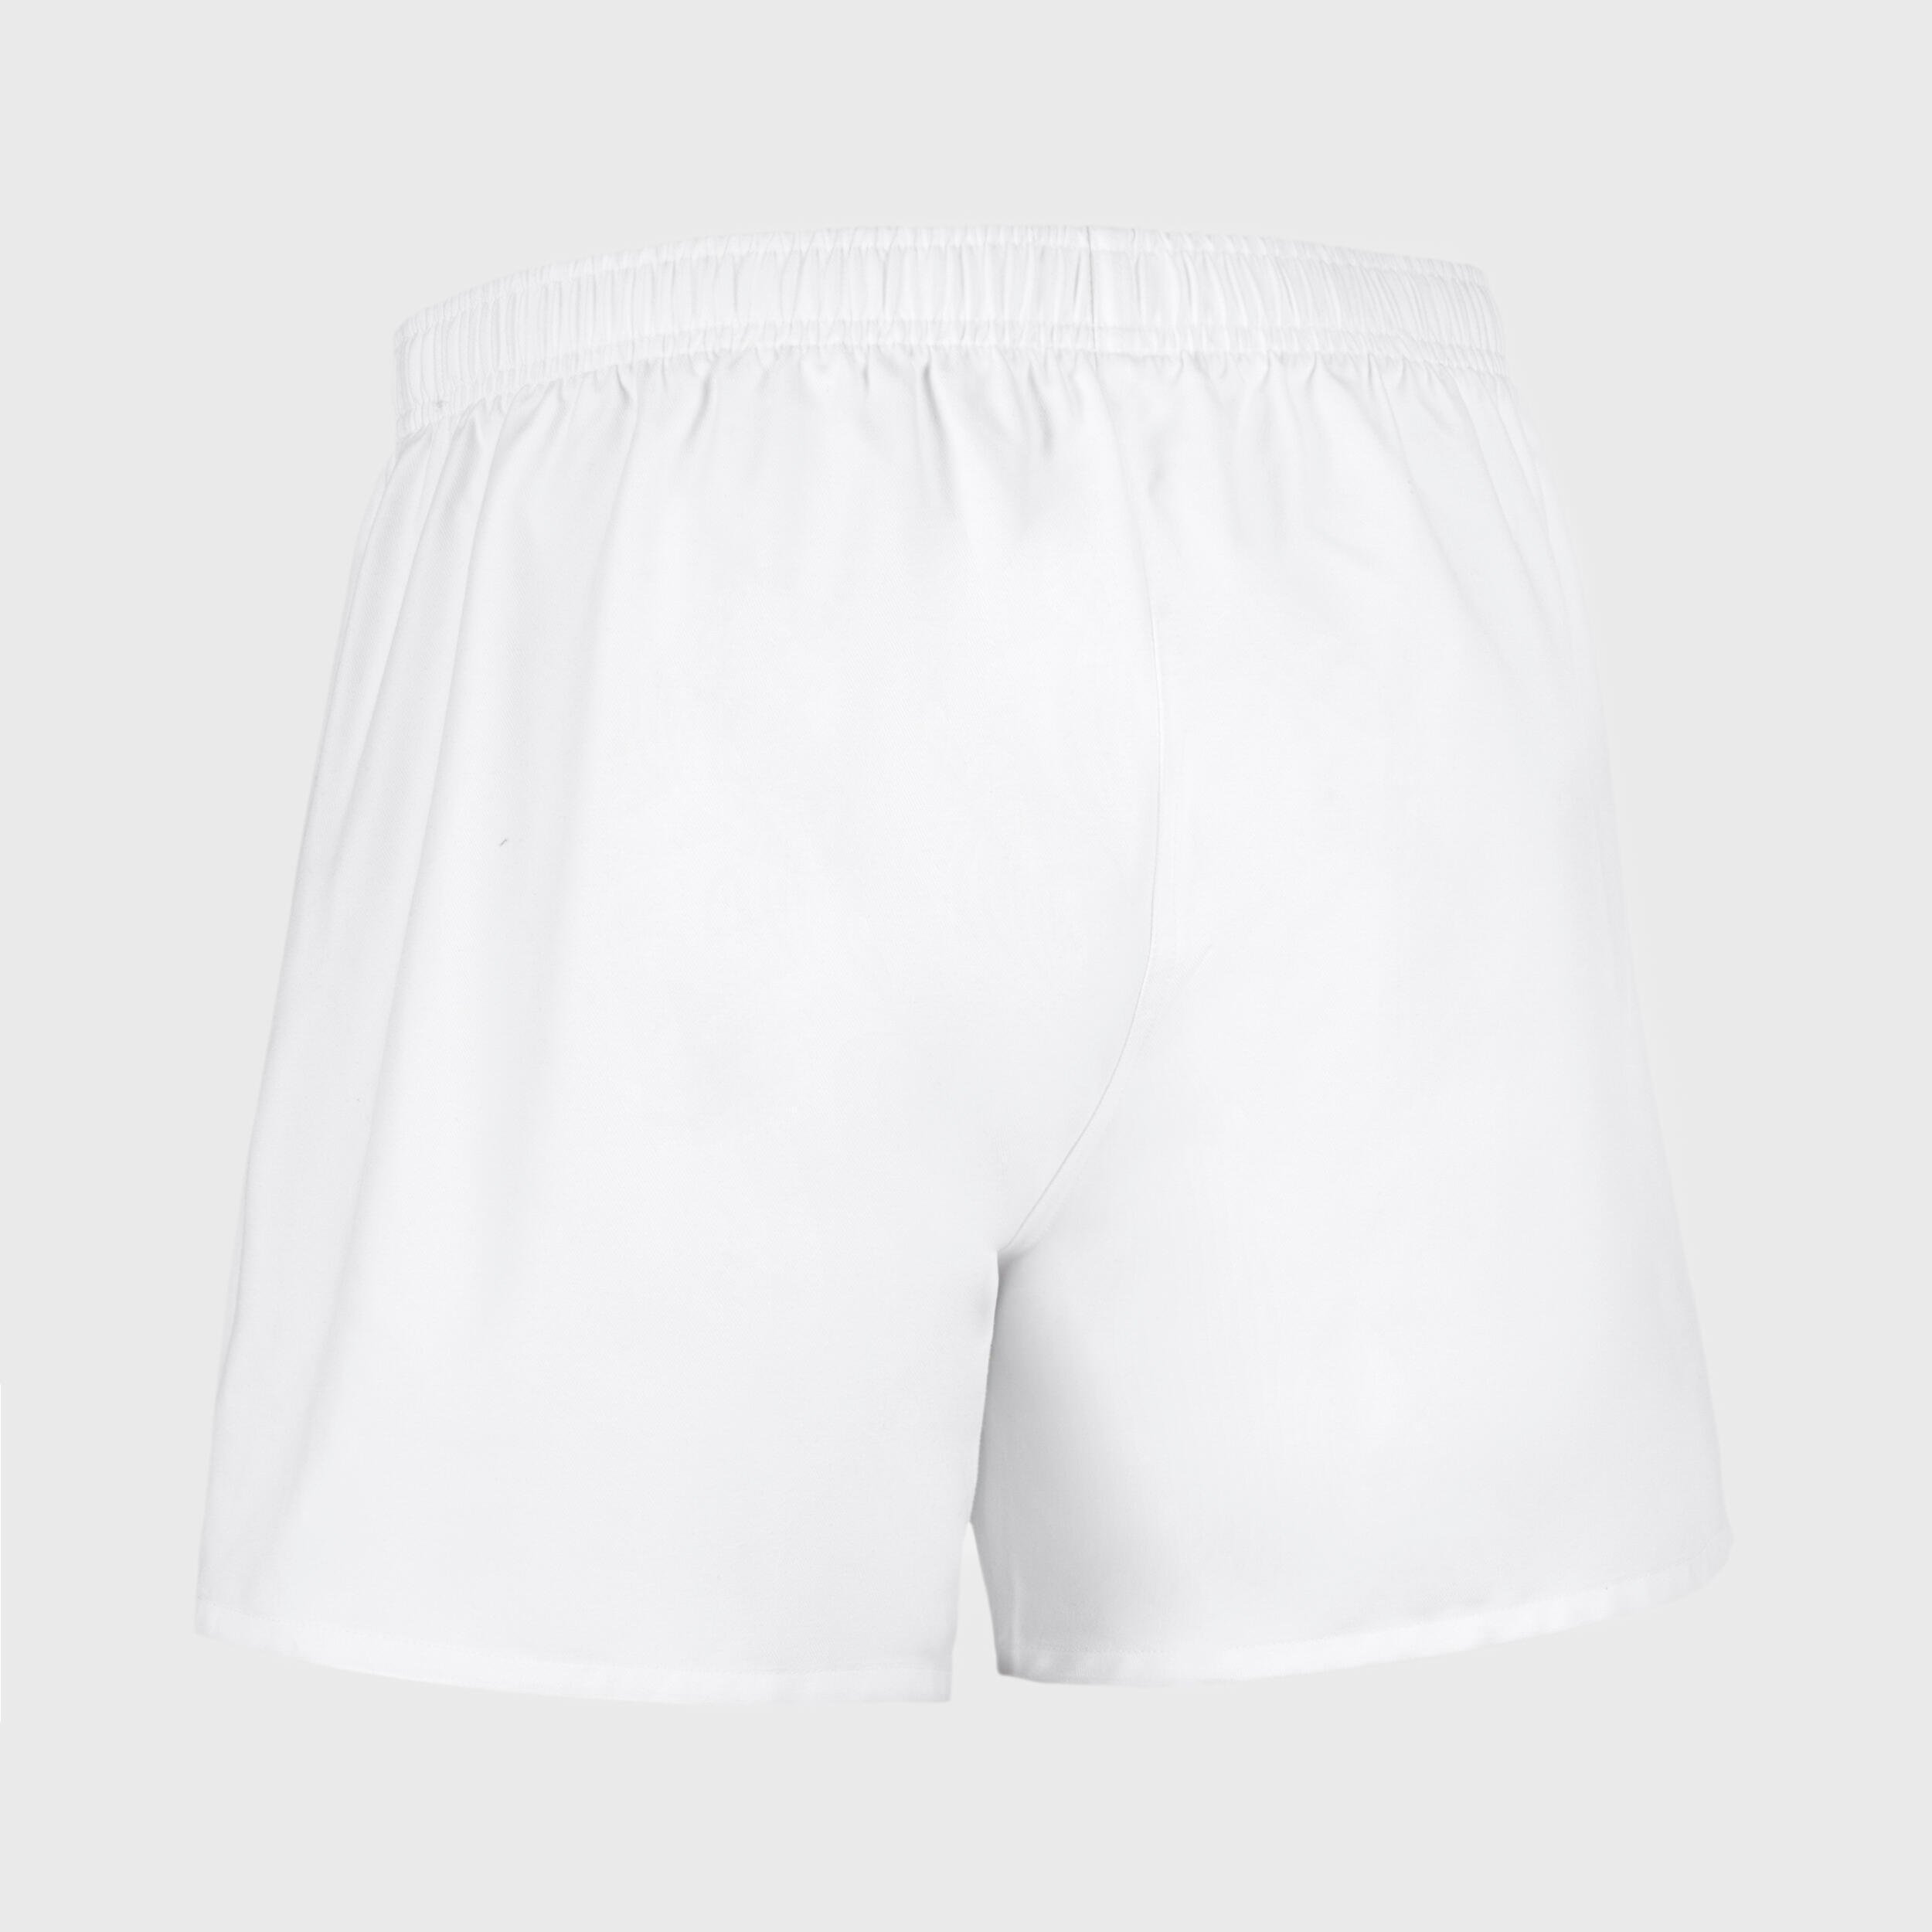 Refurbished Adult Rugby Shorts with Pockets R100 - B Grade 3/7